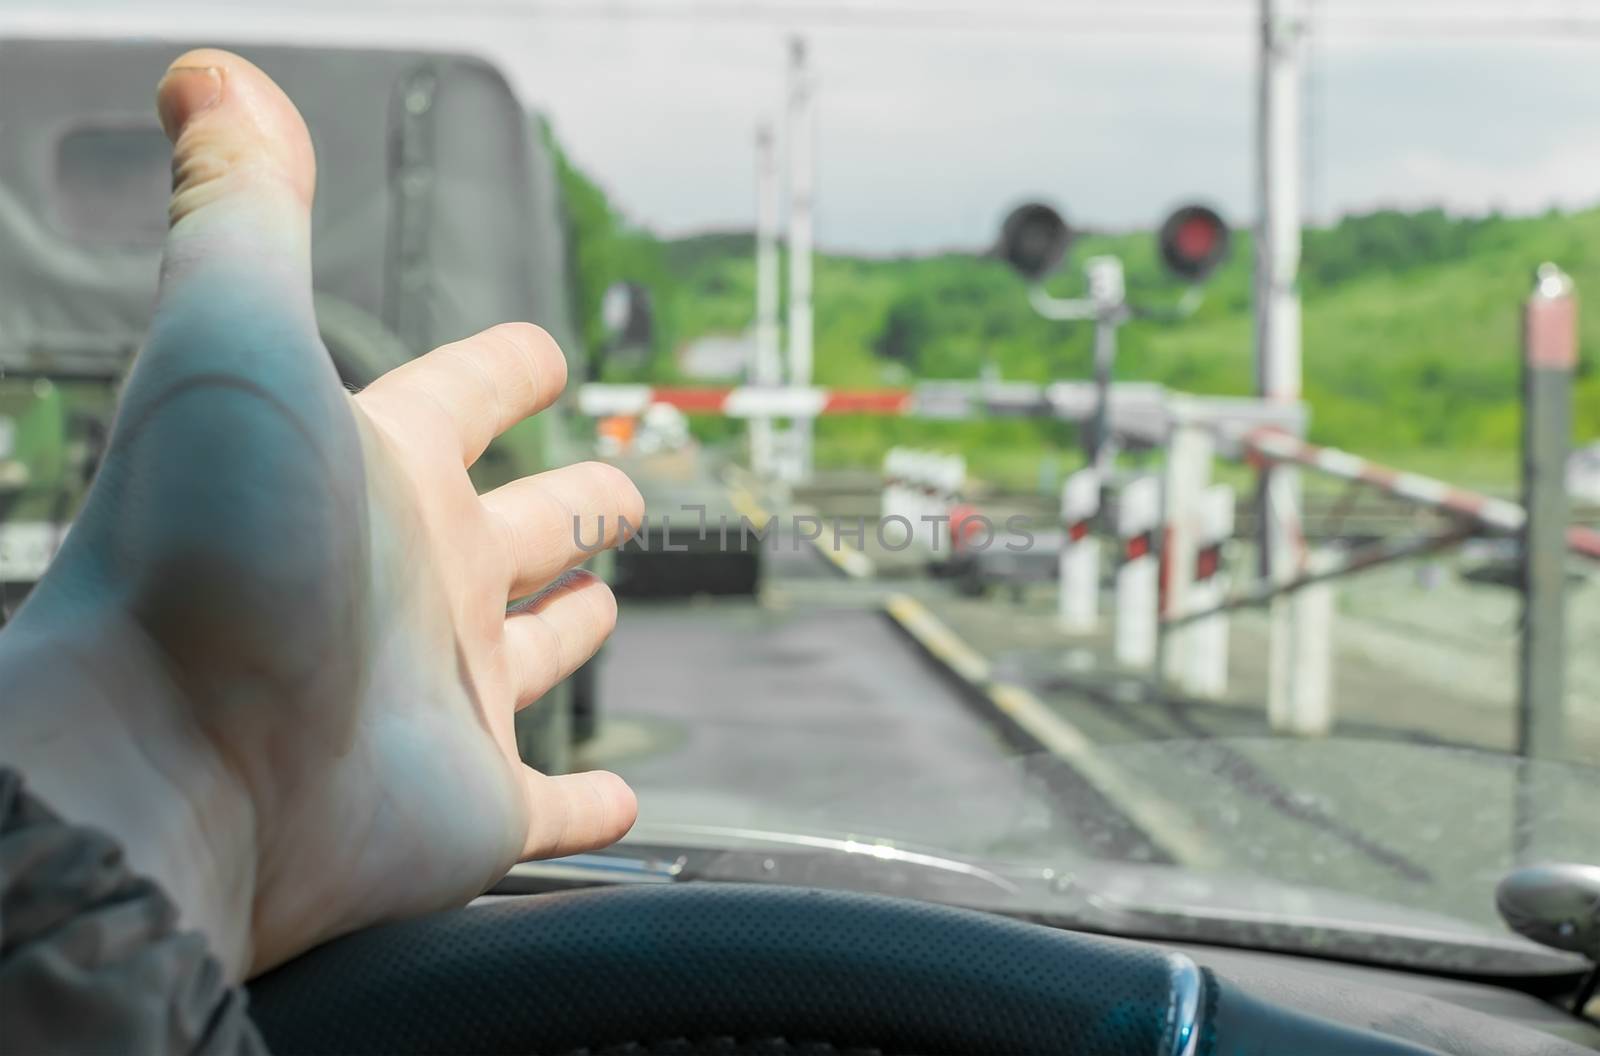 The hand of man inside the car. The car stopped in front of a closed barrier and a red traffic light before the railway crossing. Man outraged by the situation that did not have time to ride the move